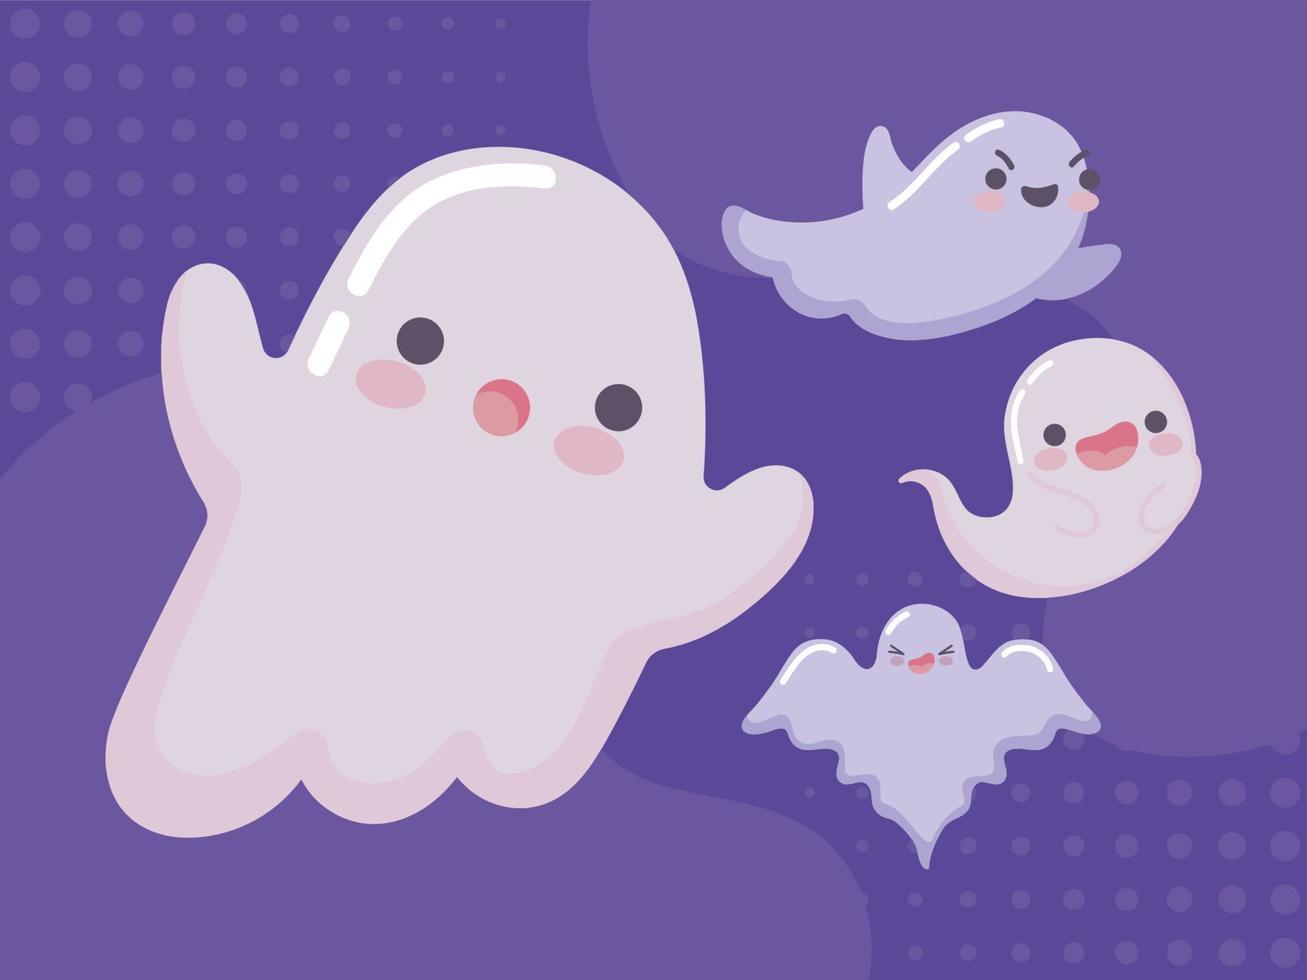 icons set, cute ghosts vector